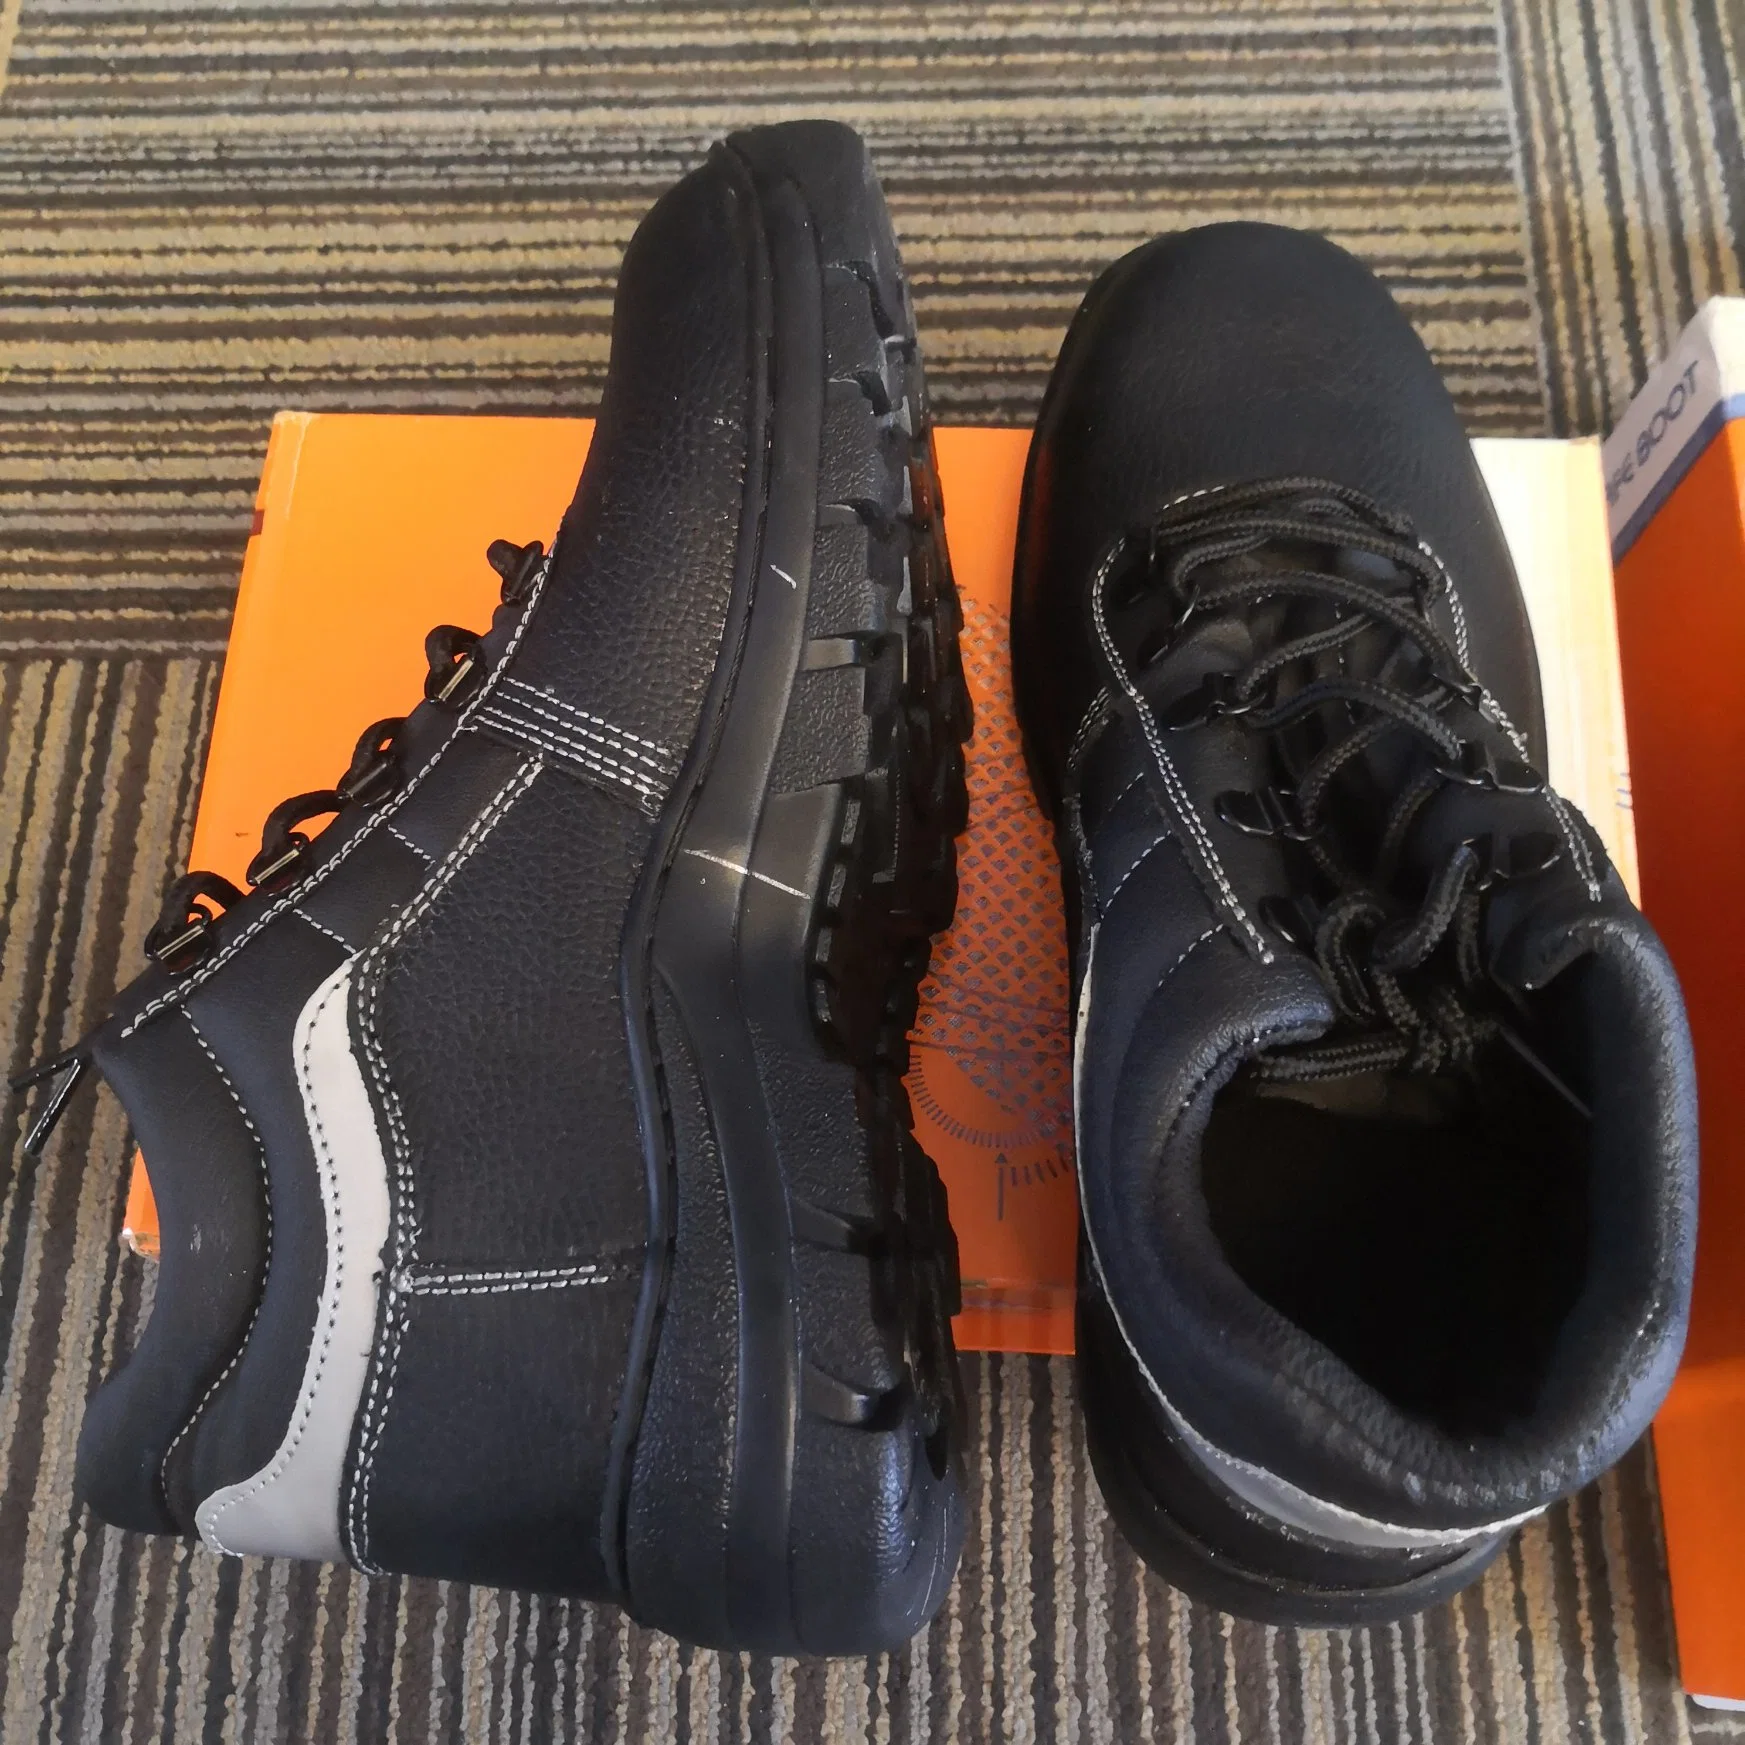 Waterproof and Warm Outdoor Travel Safety Shoes